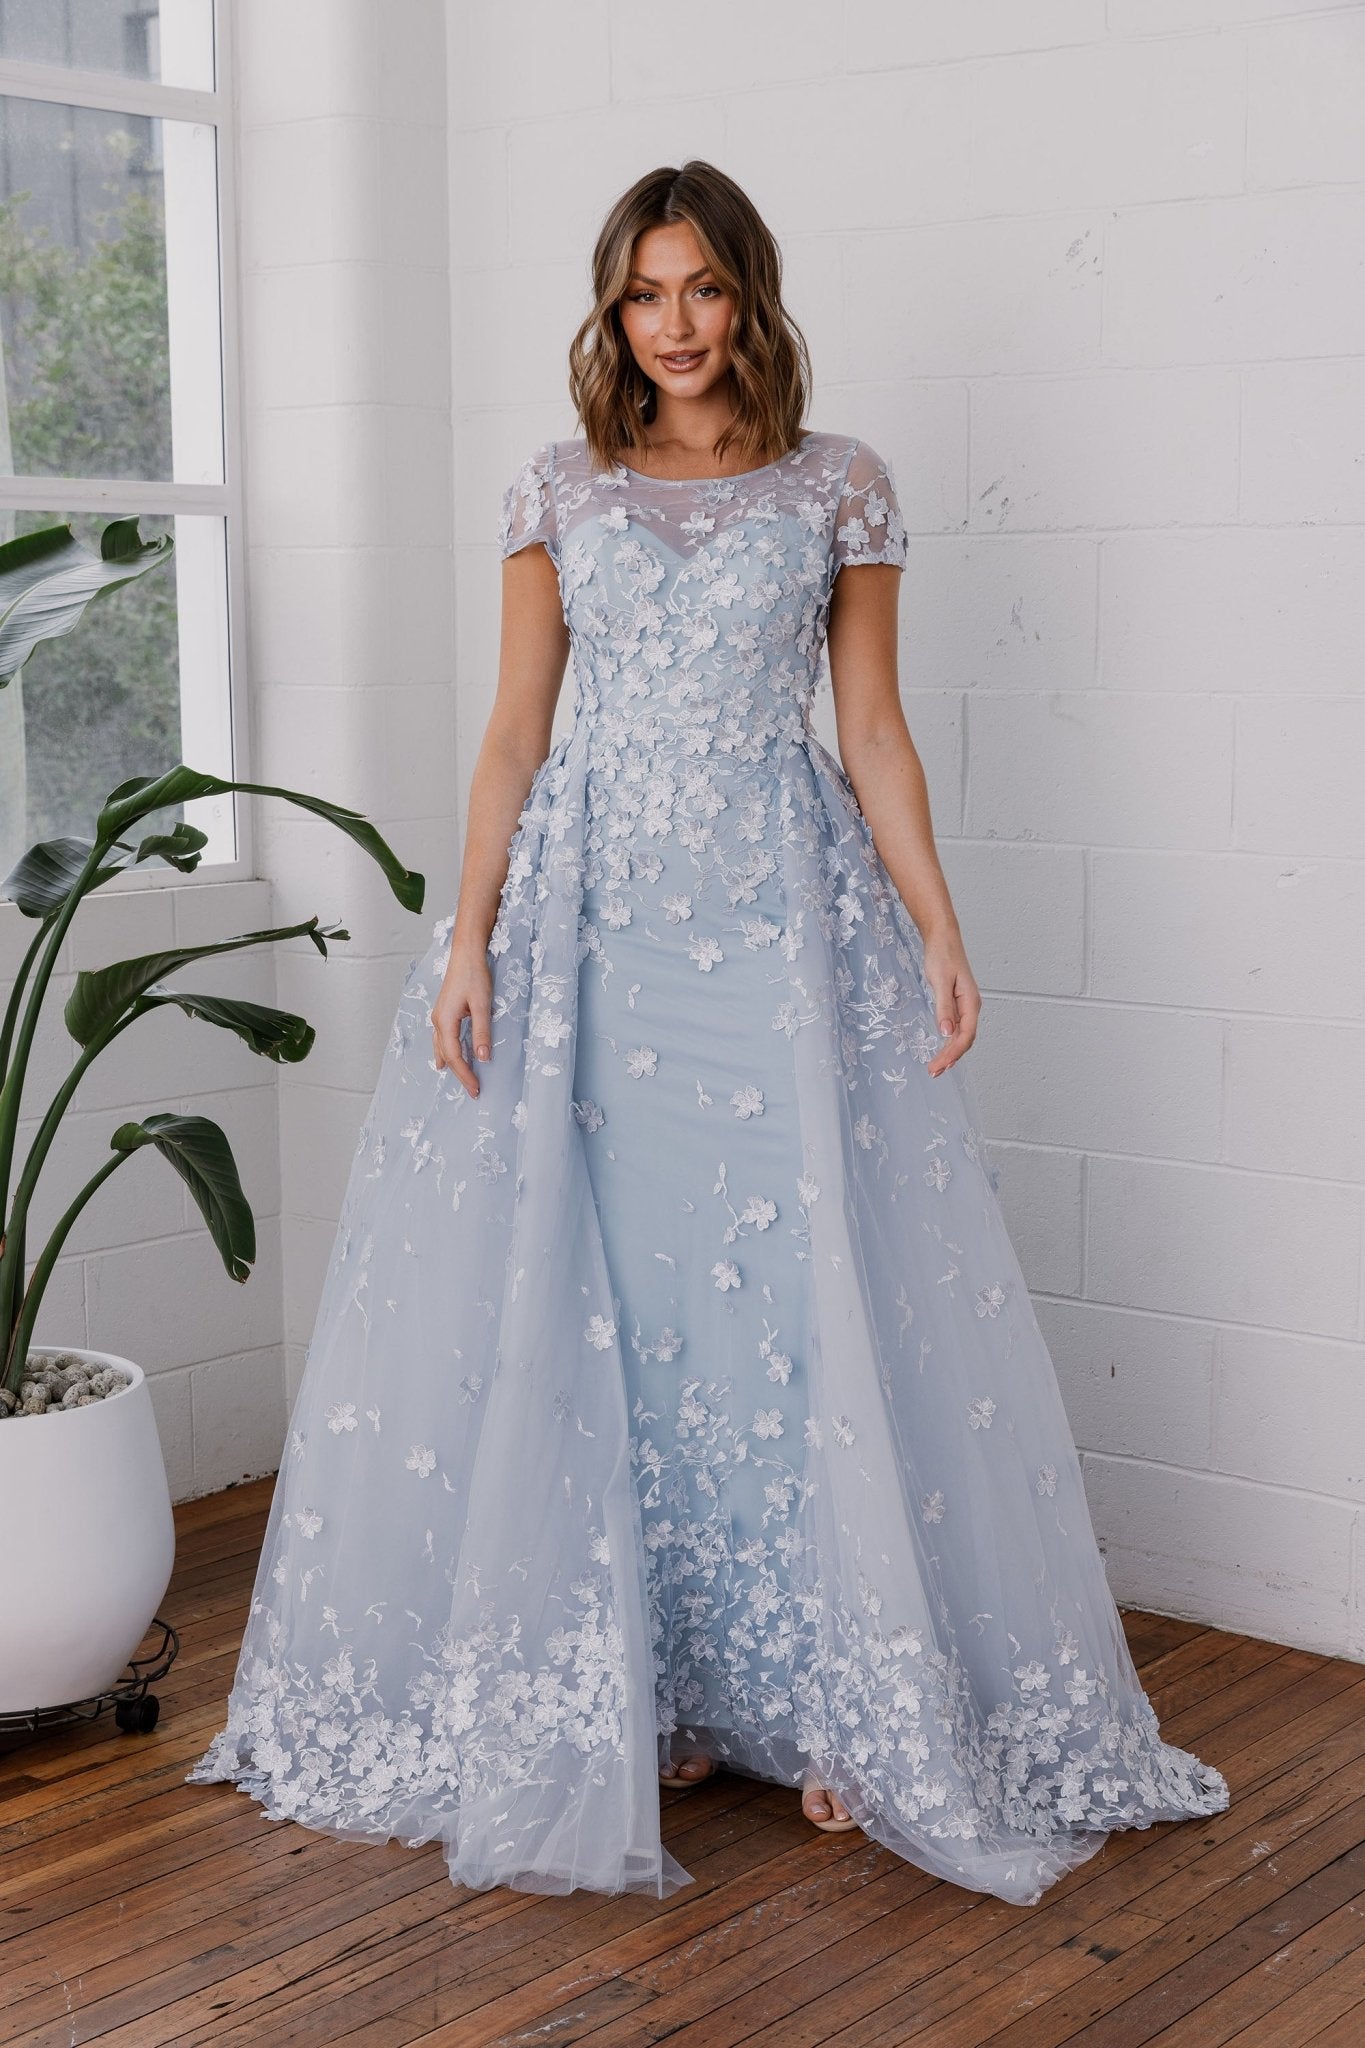 Sleeveless Square-Neck Princess Line Floral Gown with Pockets | Floral  bridesmaid dresses, Bridesmaid dresses online, Bridesmaid dresses